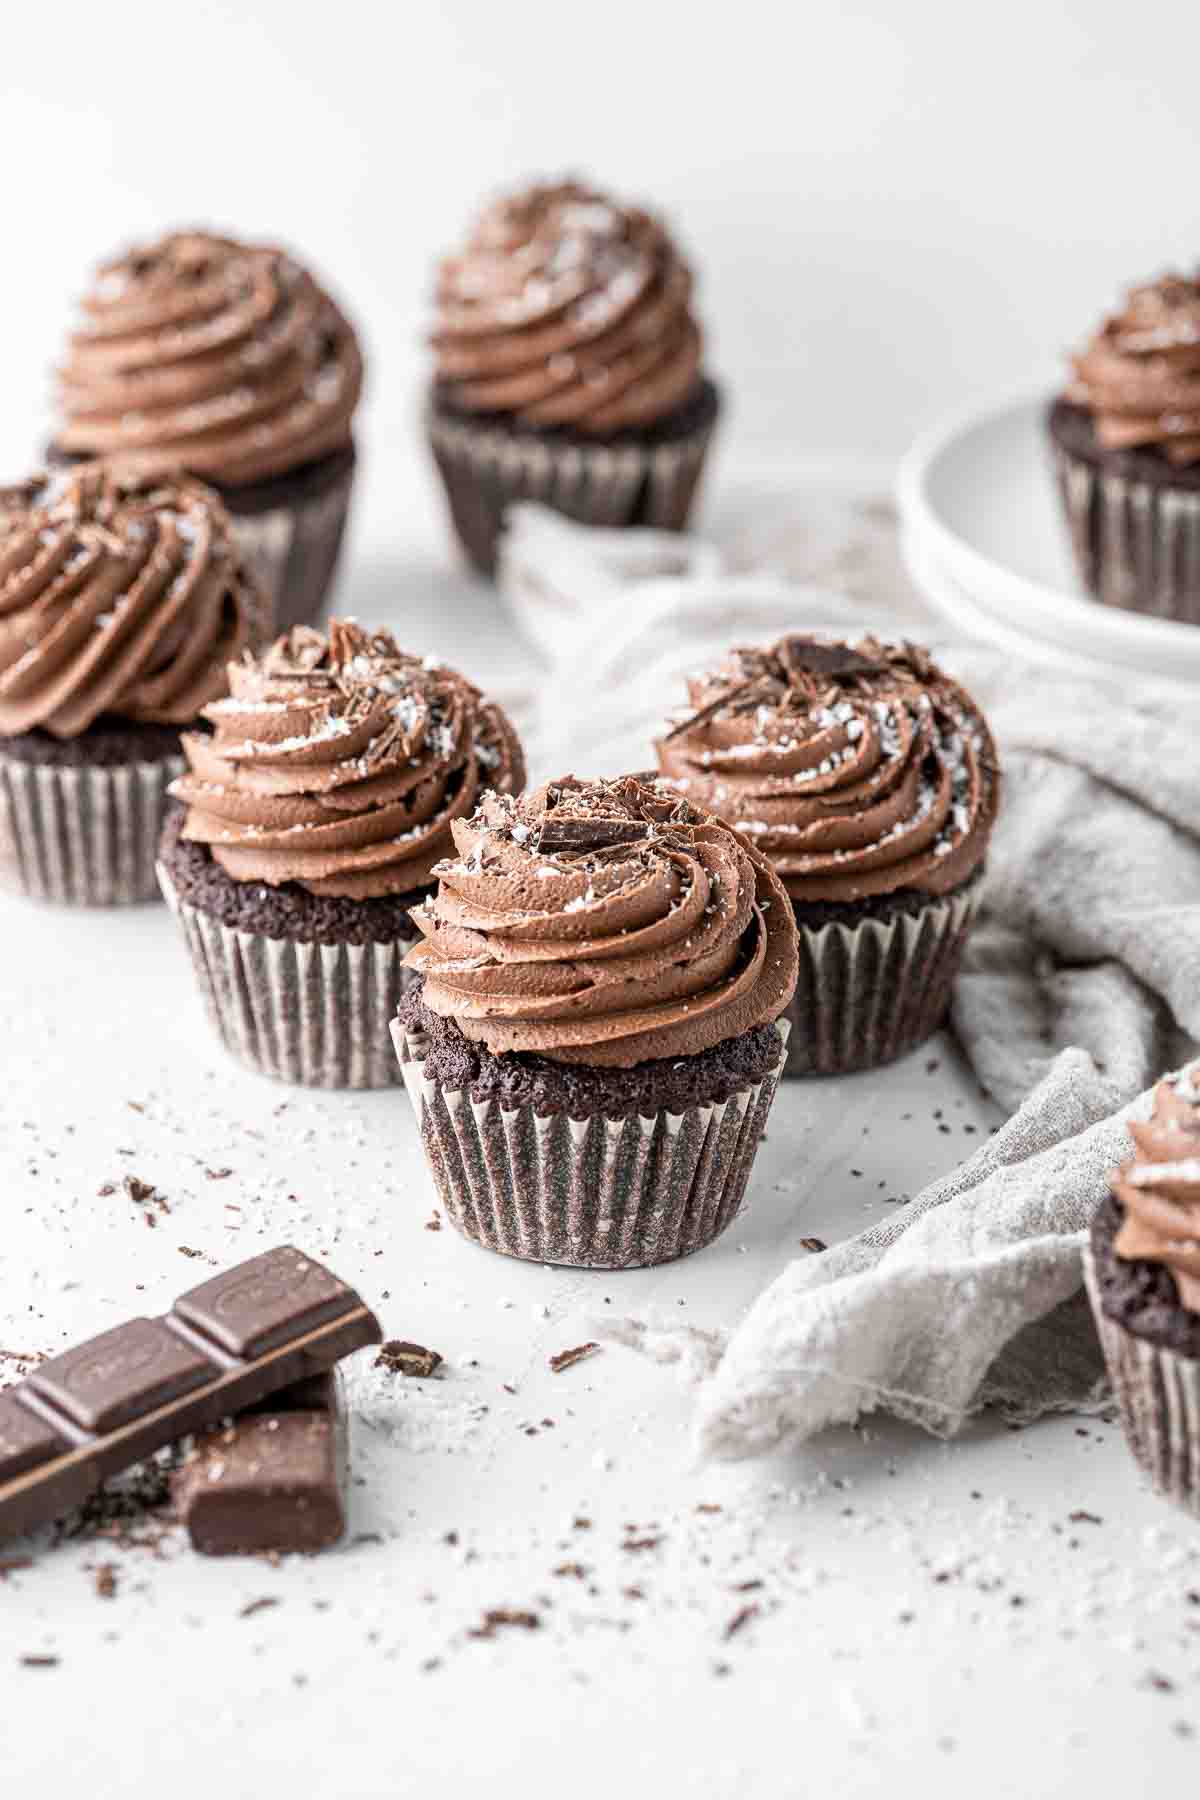 Chocolate and coconut cupcakes with swirls of chocolate and coconut buttercream. 